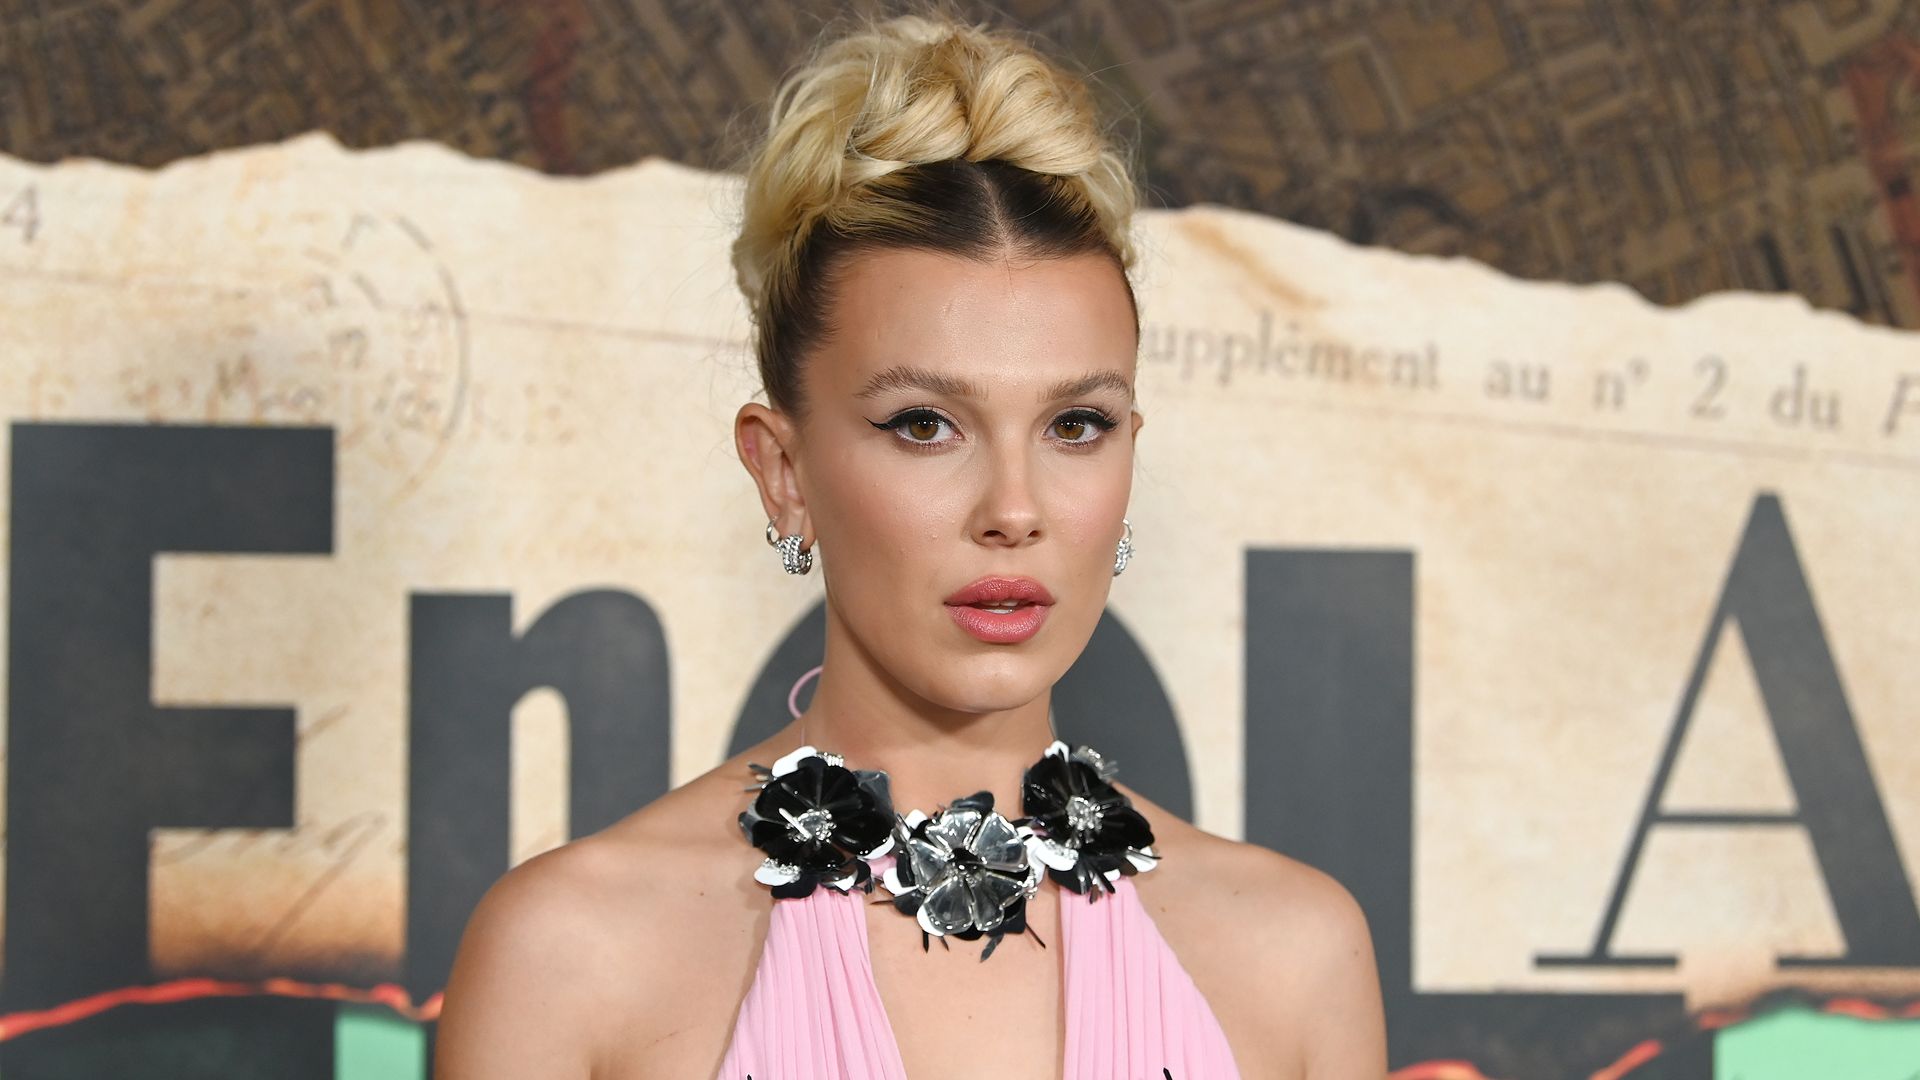 Millie Bobby Brown looks almost unrecognisable with new hair extensions